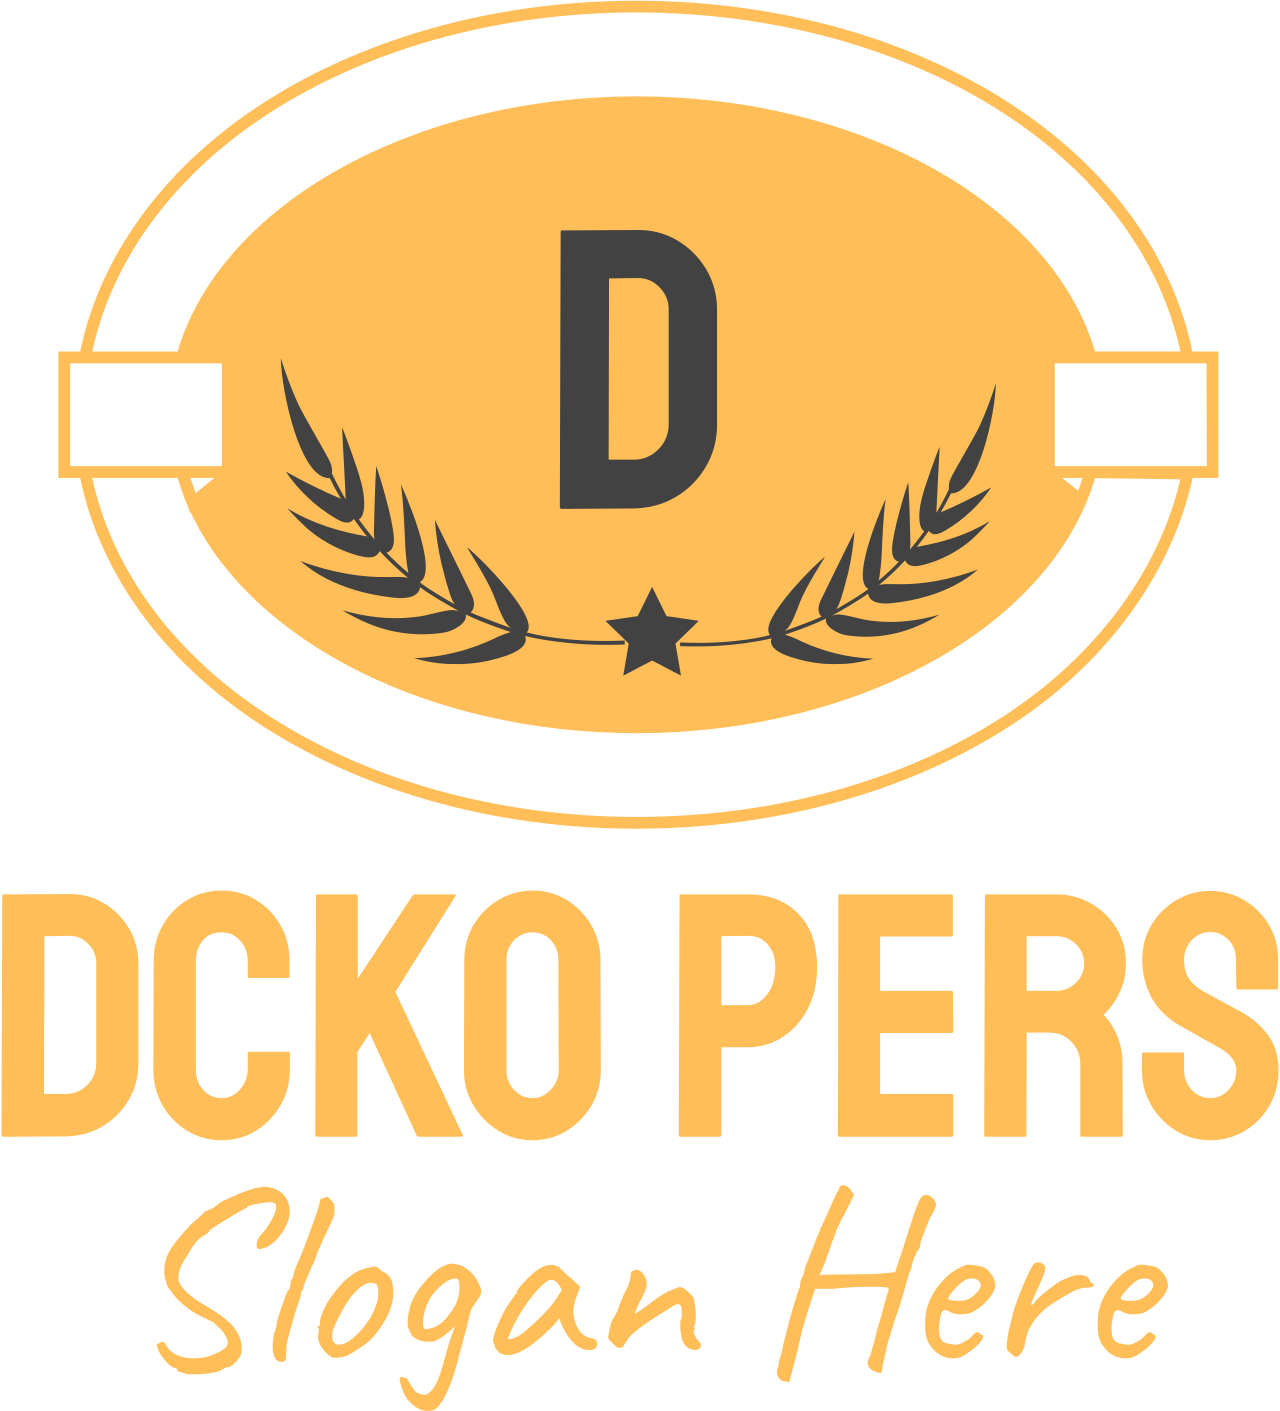 DCKO PERS's web page